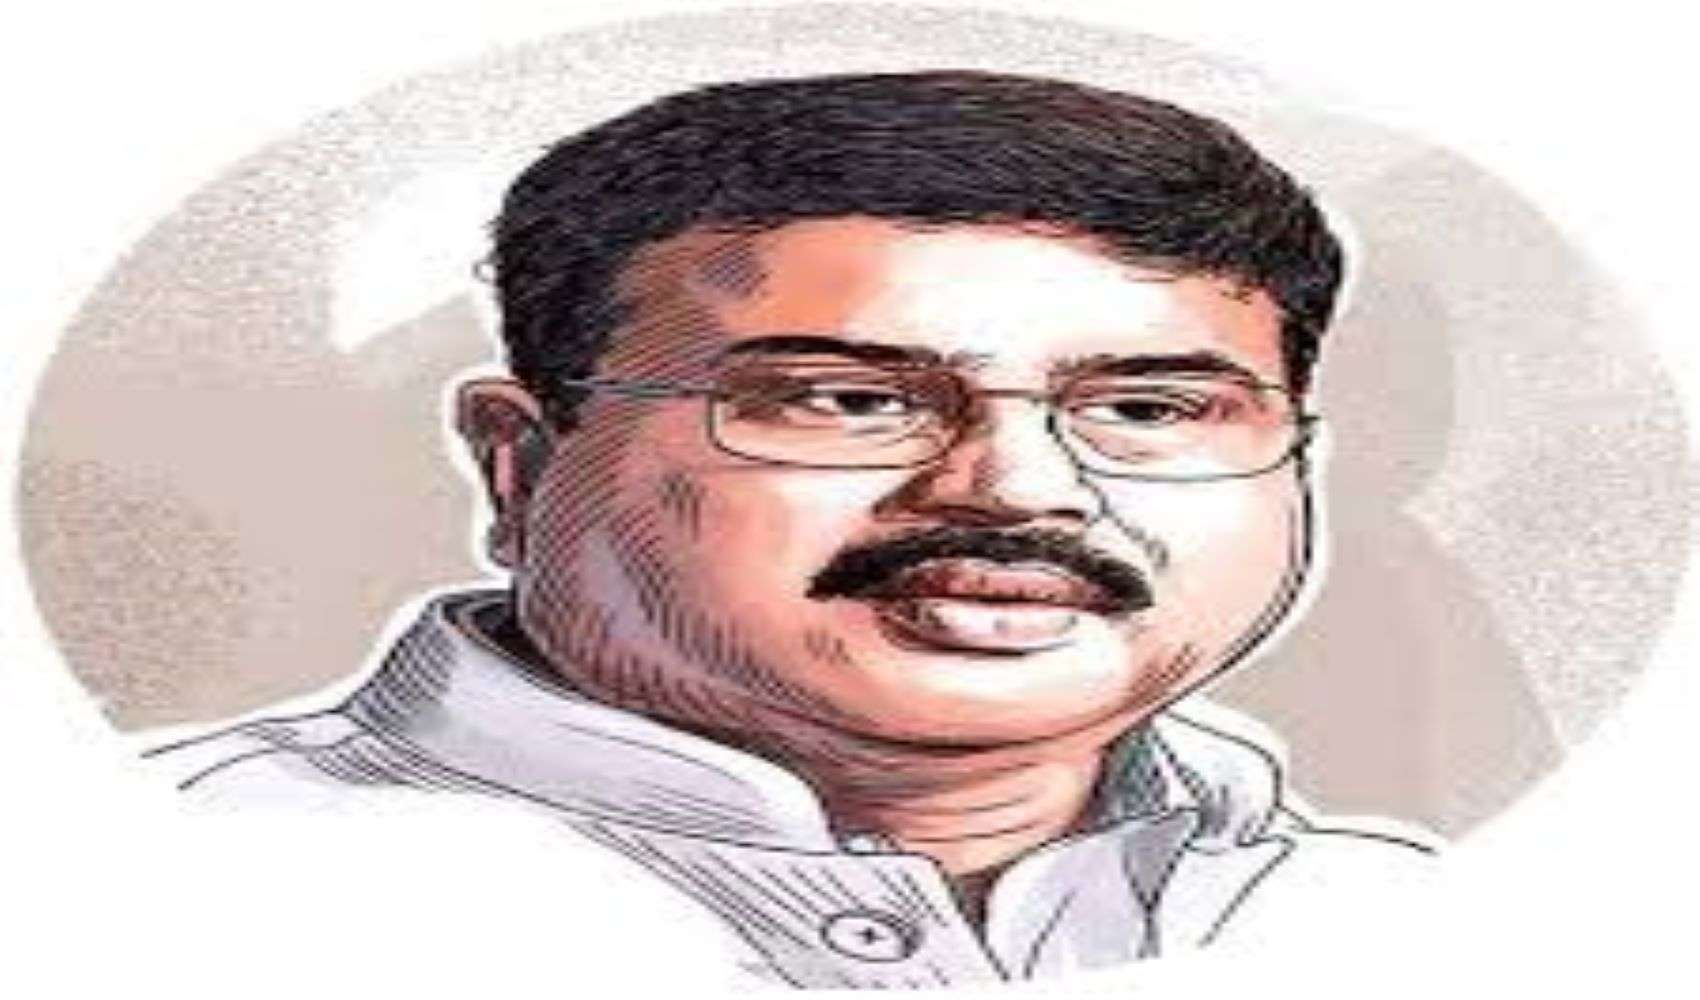 Dharmendra Pradhan is the new Minister of Education of India.